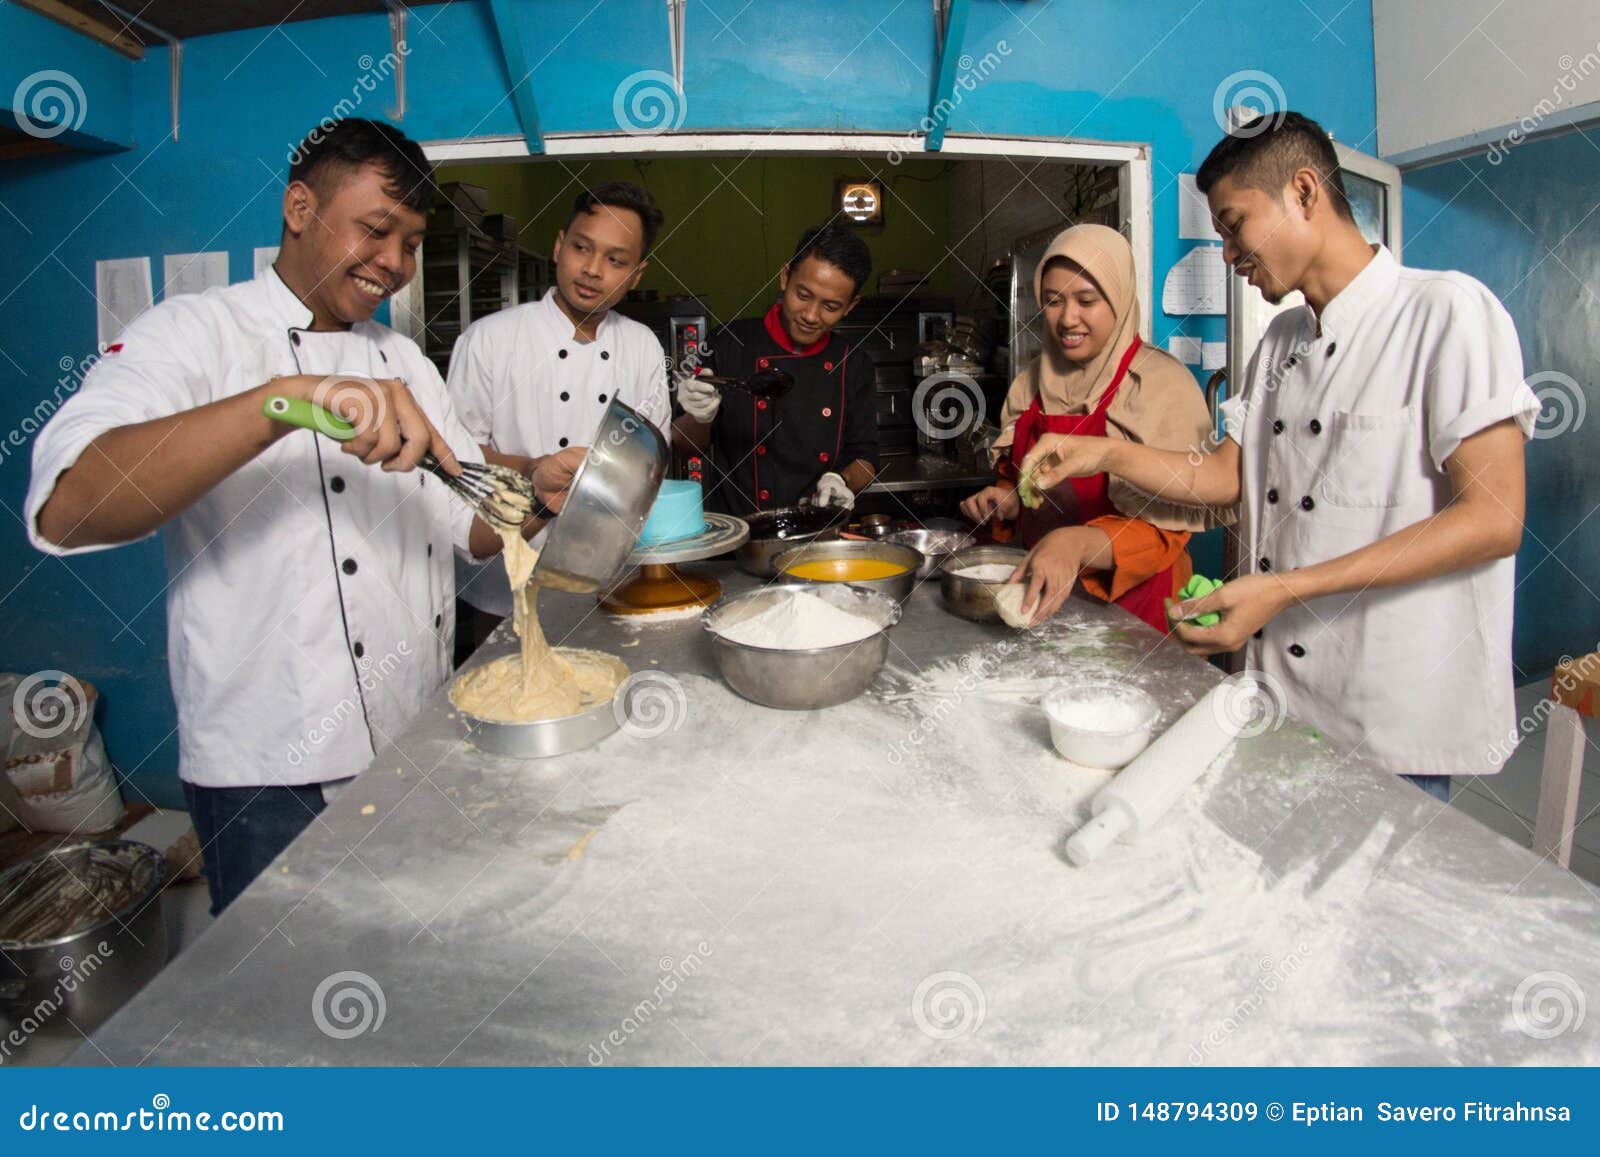 group of happy young asian pastry chef preparing dough with flour, profesional chef working at kitchen